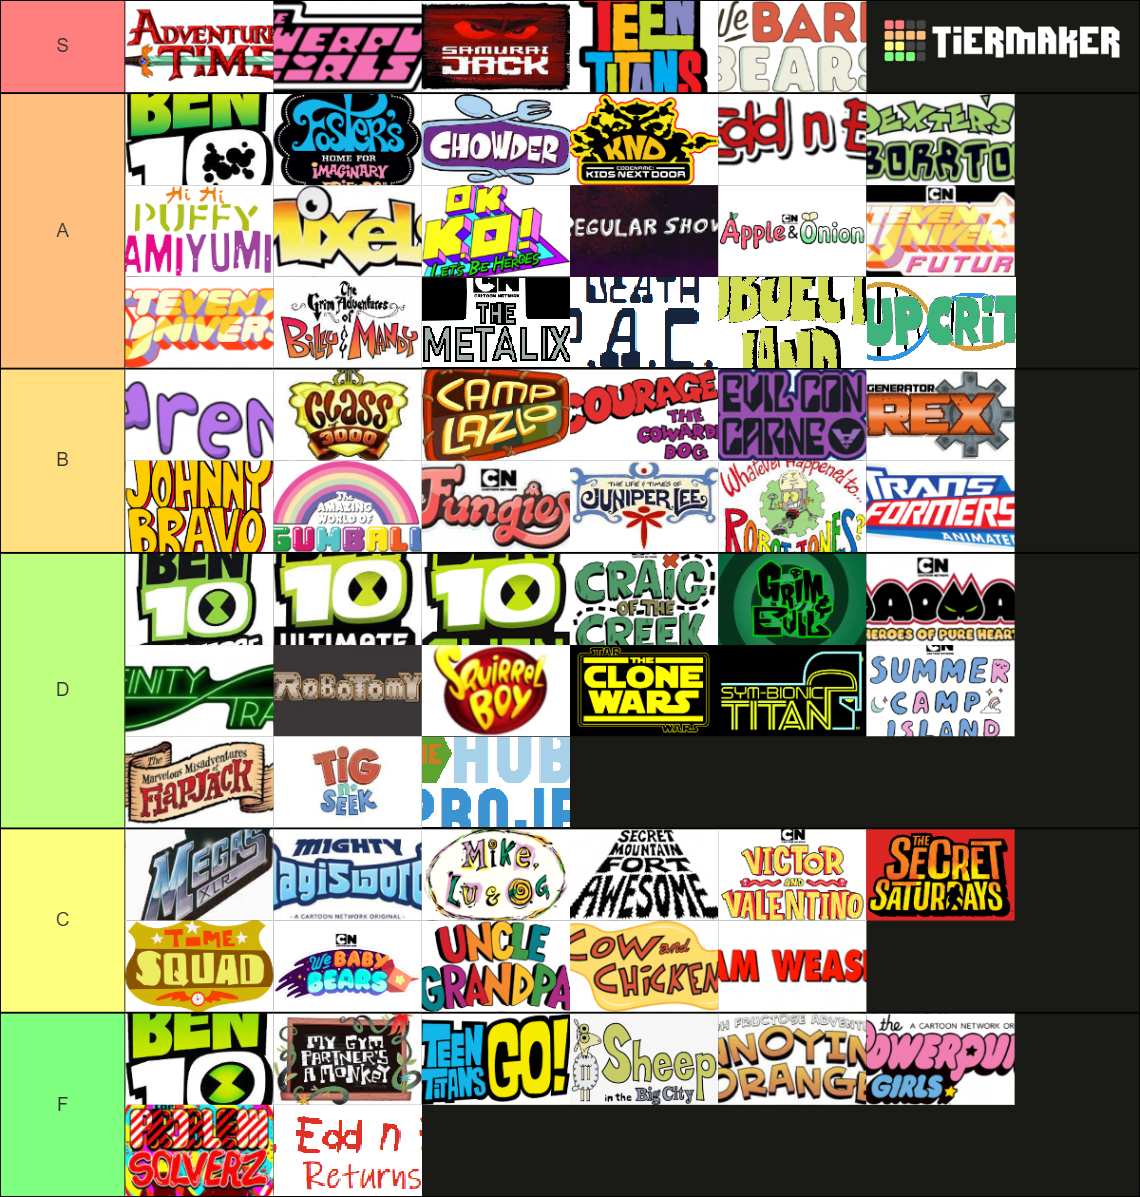 Every Original Cartoon Network Show Of The 90s, Ranked